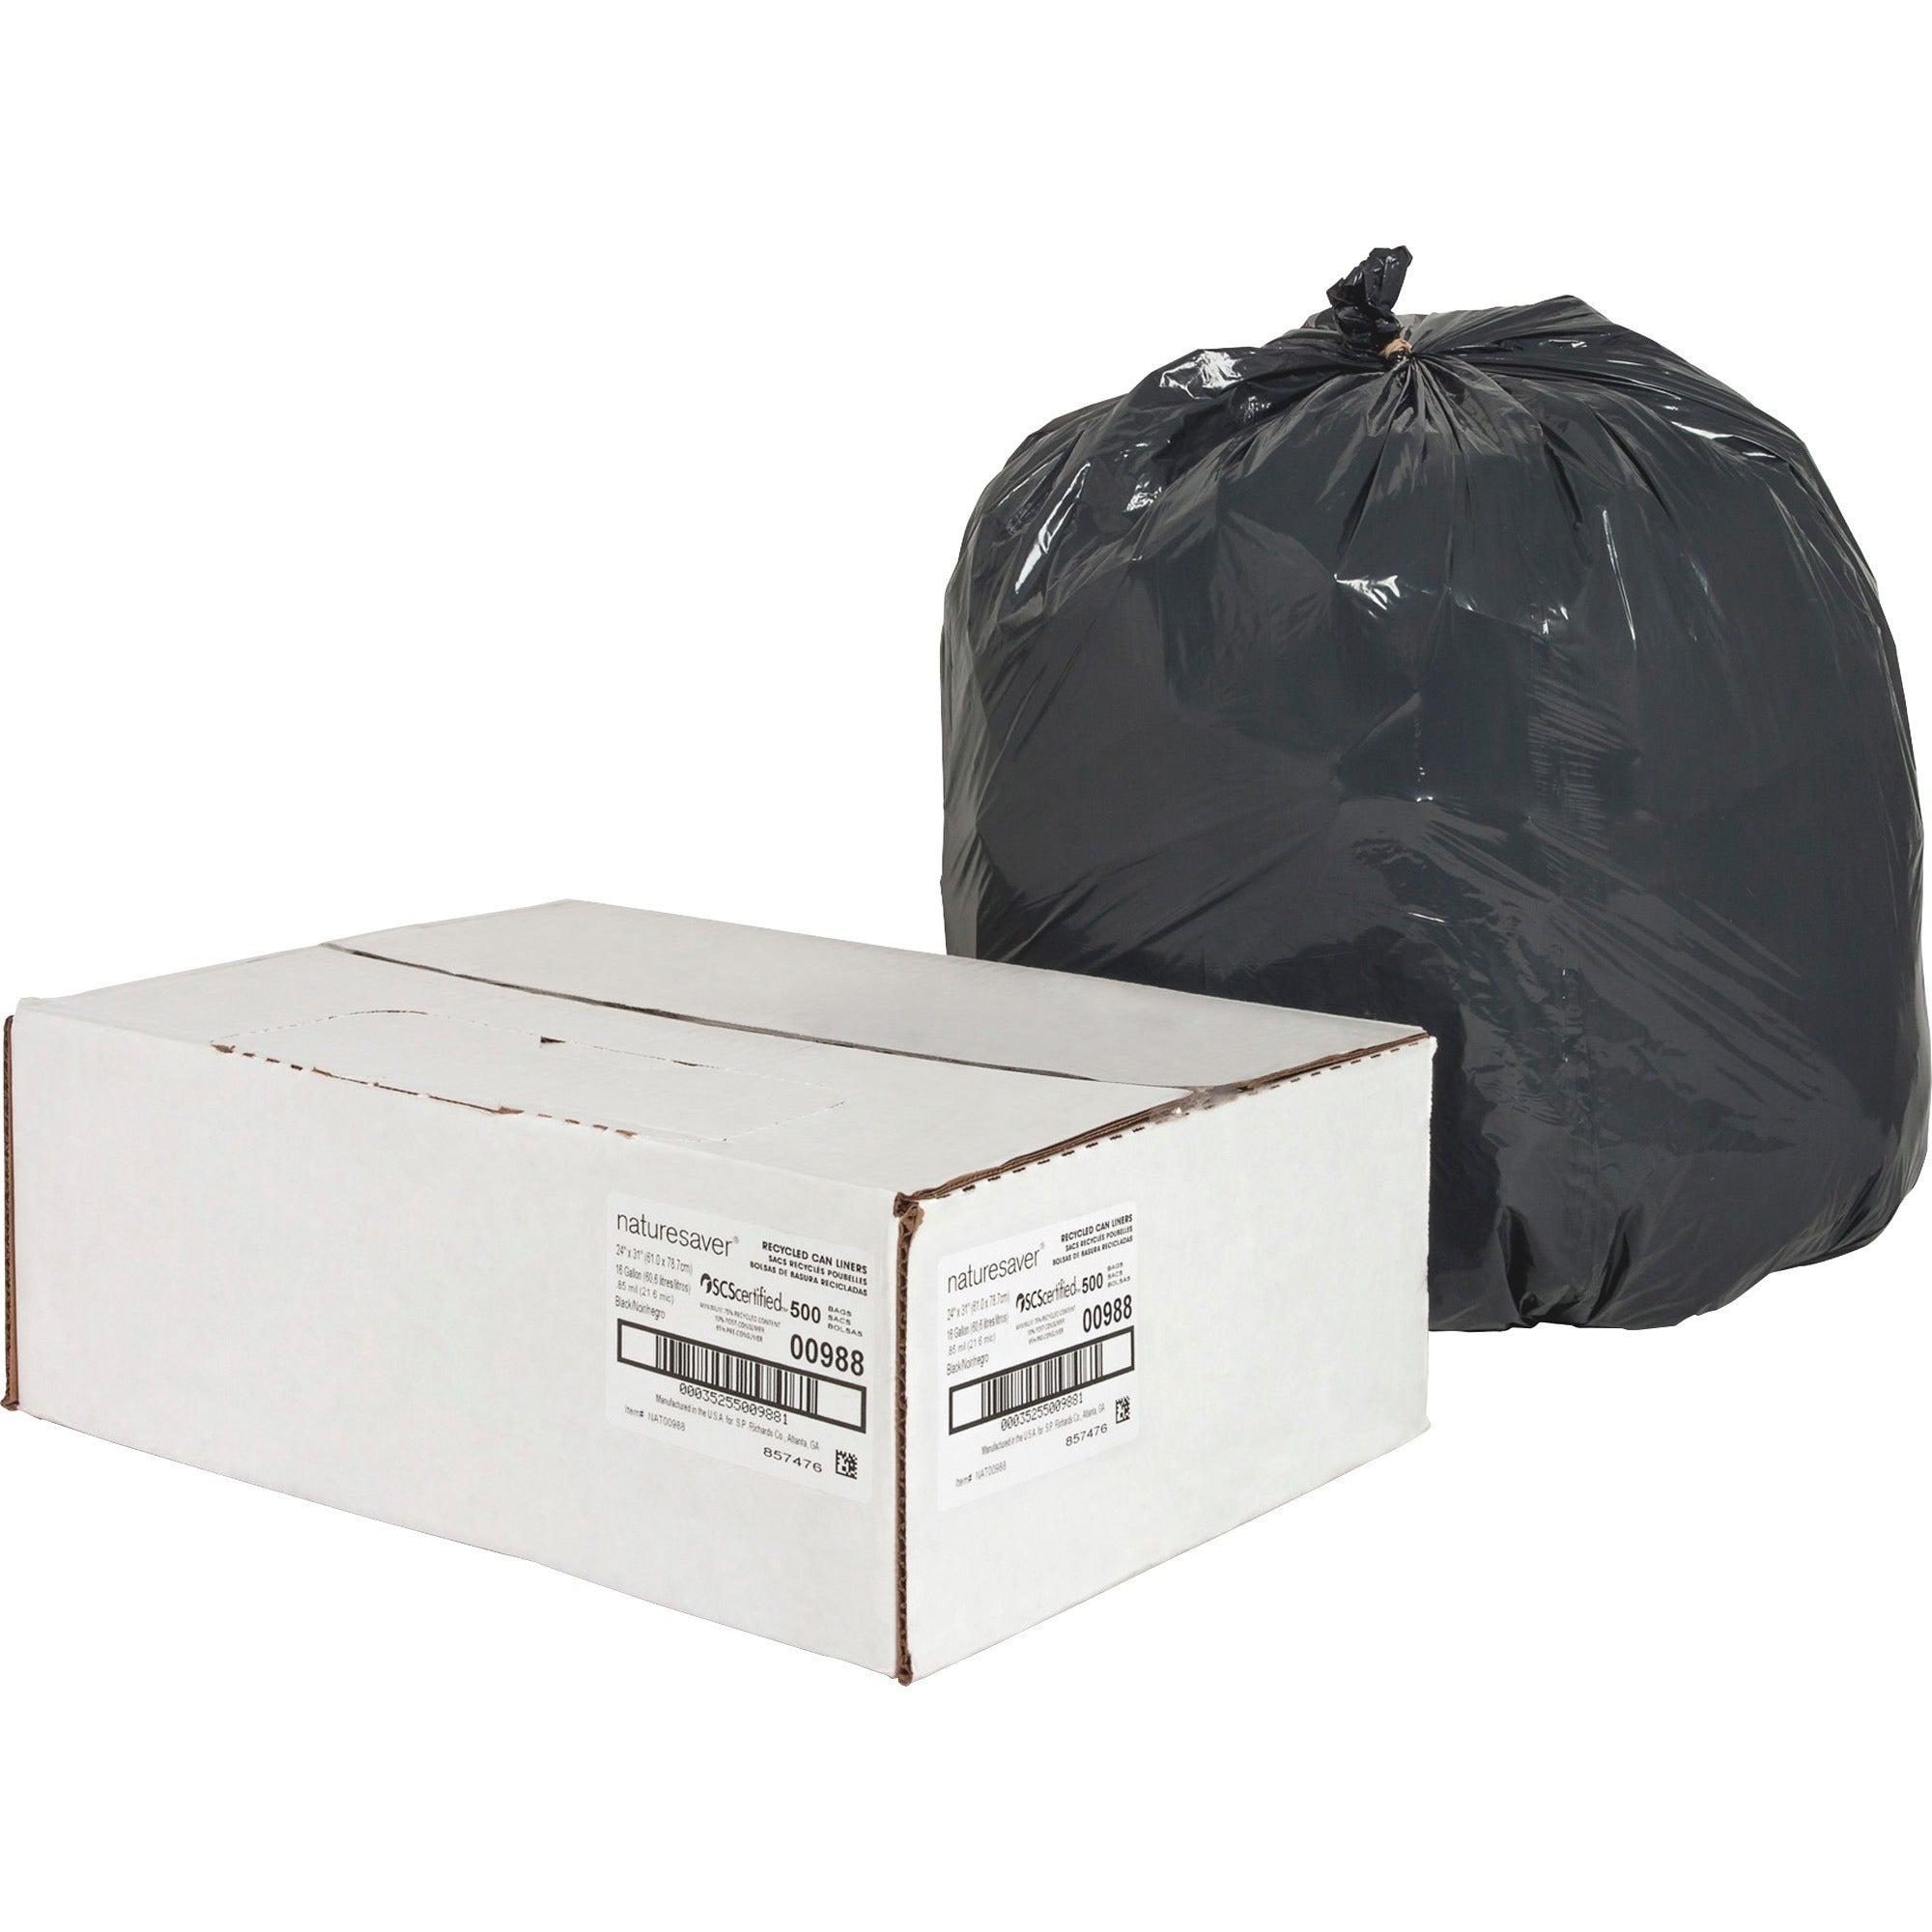 Nature Saver Black Low-density Recycled Can Liners - Small Size - 16 gal Capacity - 24" Width x 33" Length - 0.85 mil (22 Micron) Thickness - Low Density - Black - Plastic - 500/Carton - Cleaning Supplies - Recycled - 